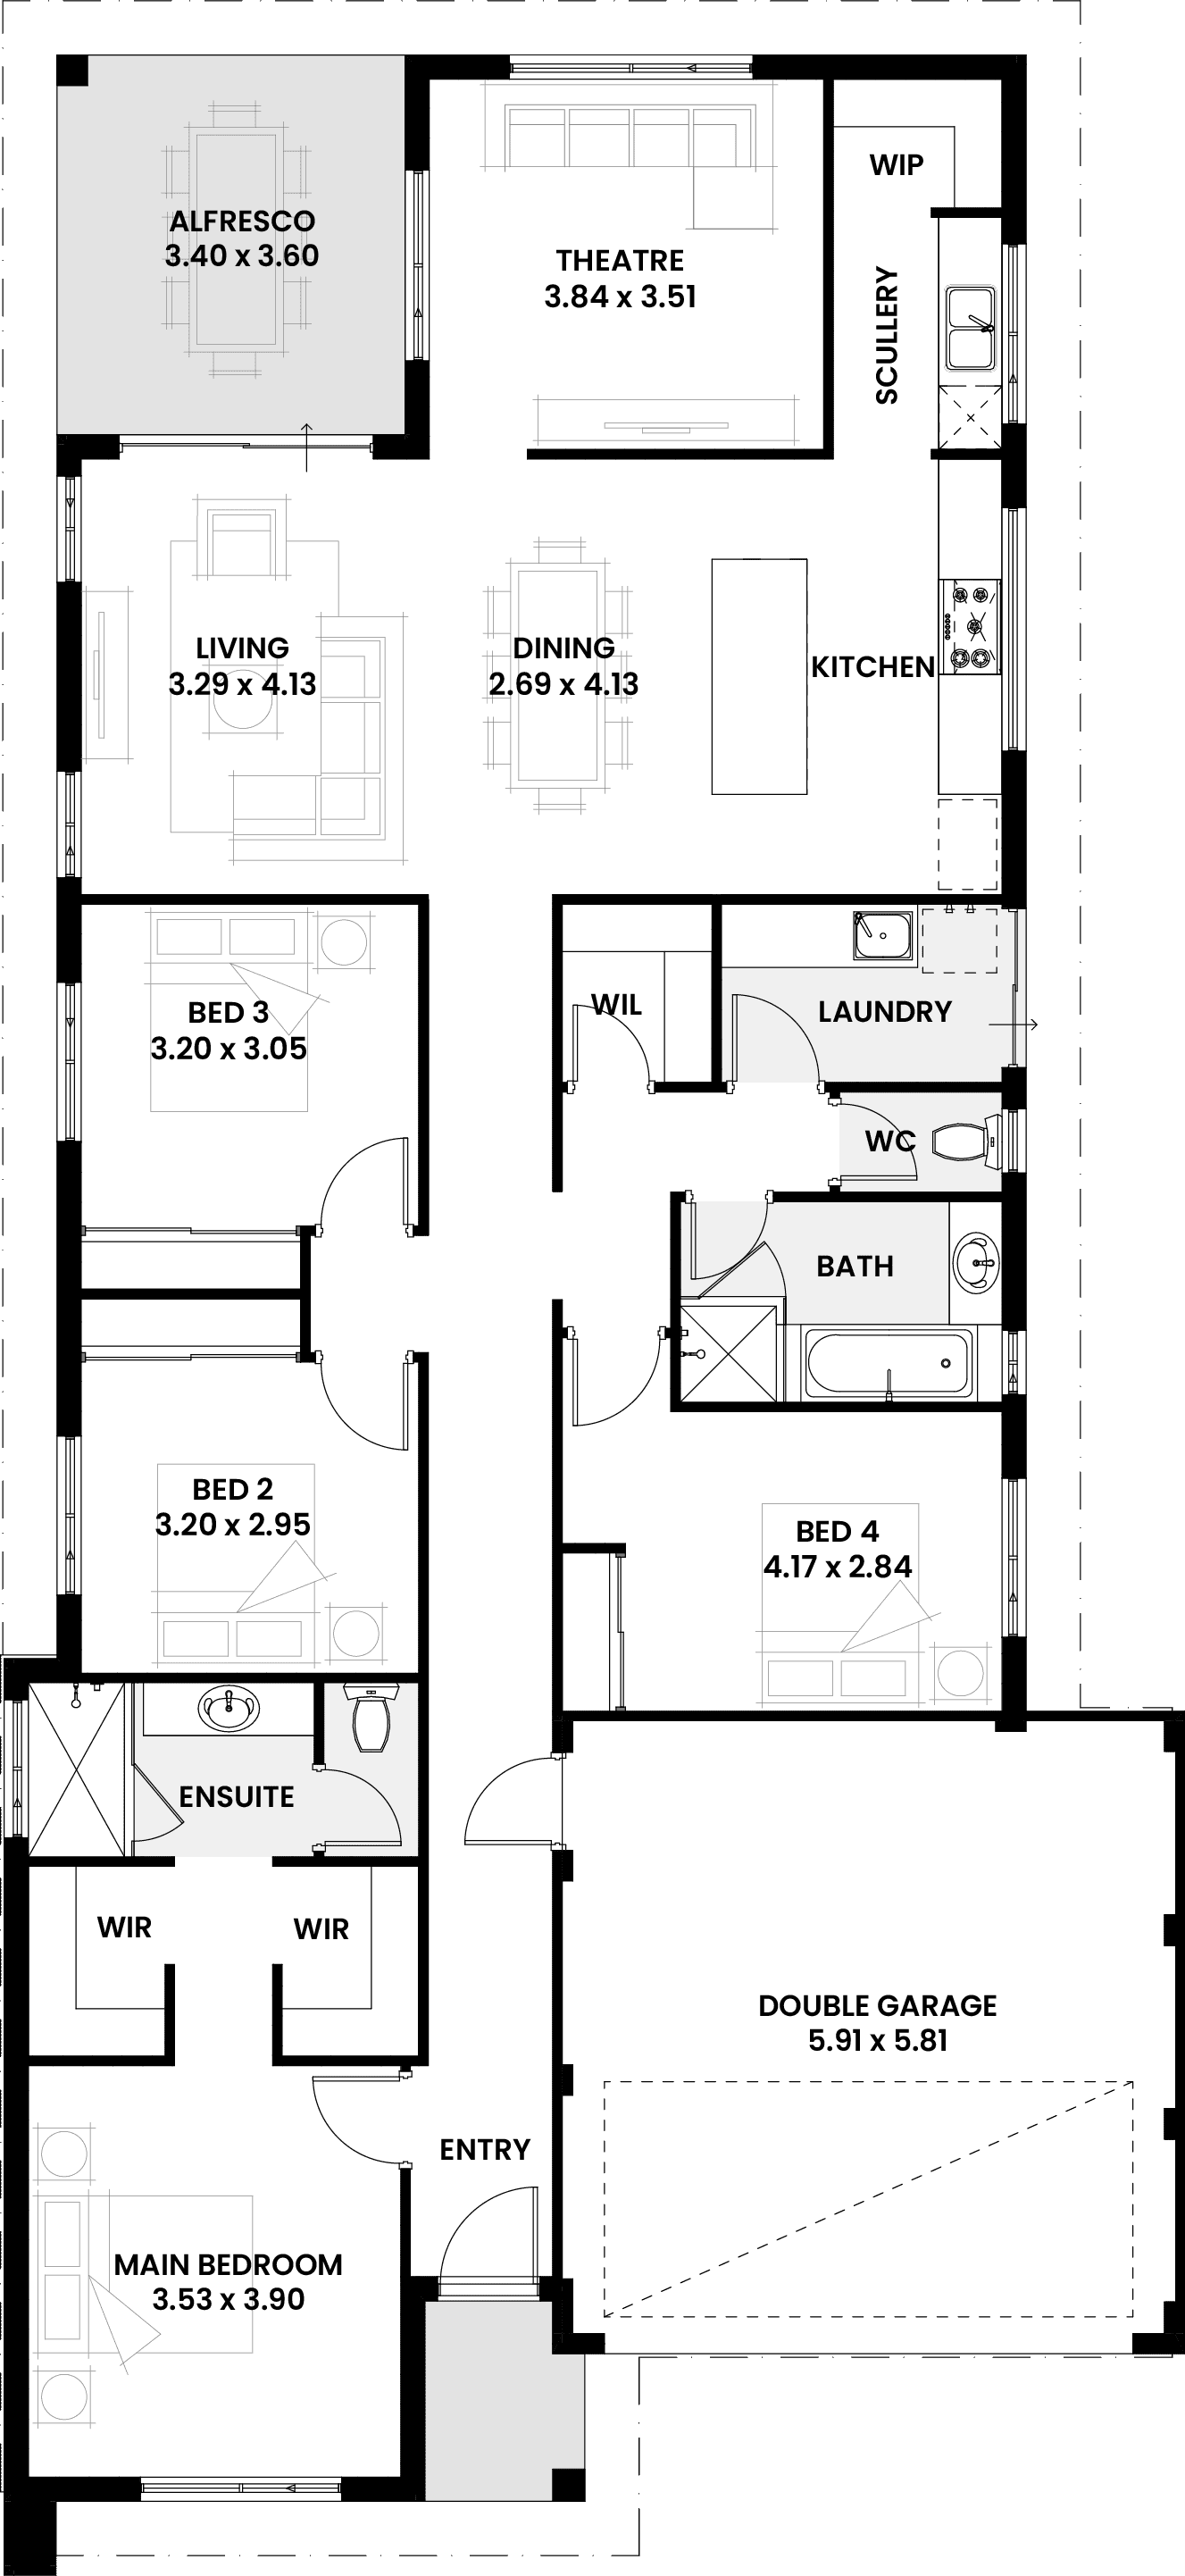 Floorplan for The Beech, a Move Homes new home design perfect for first time buyers and new builders in Perth